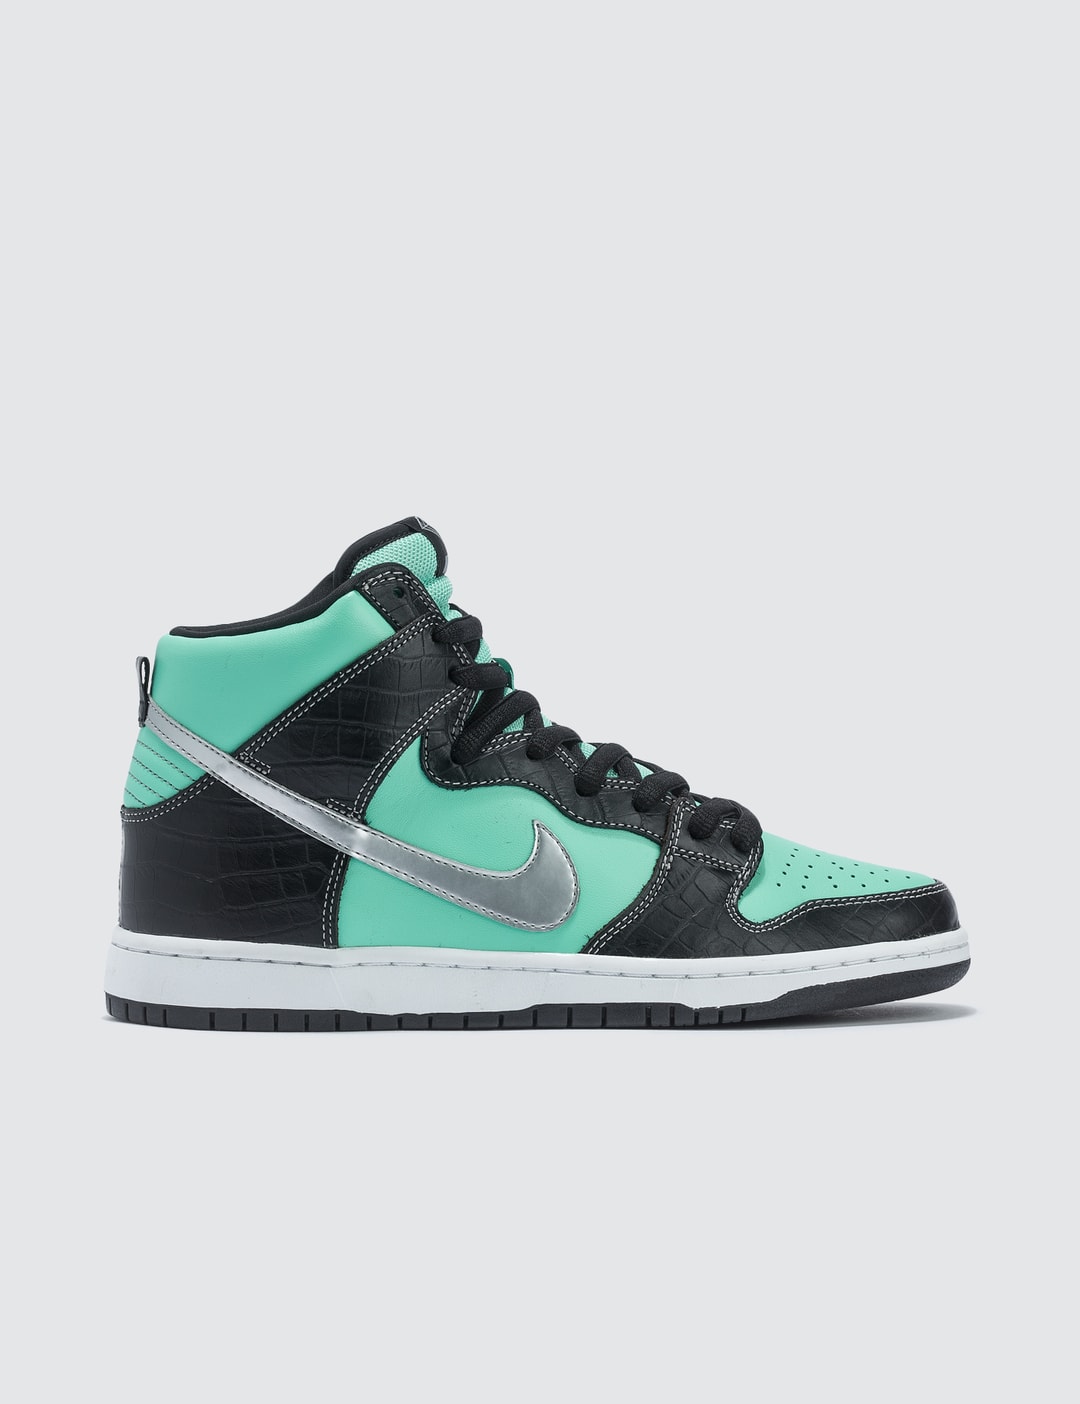 dynastie Trend mooi Nike - Dunk Sb High Diamond Supply Co. "tiffany" | HBX - Globally Curated  Fashion and Lifestyle by Hypebeast